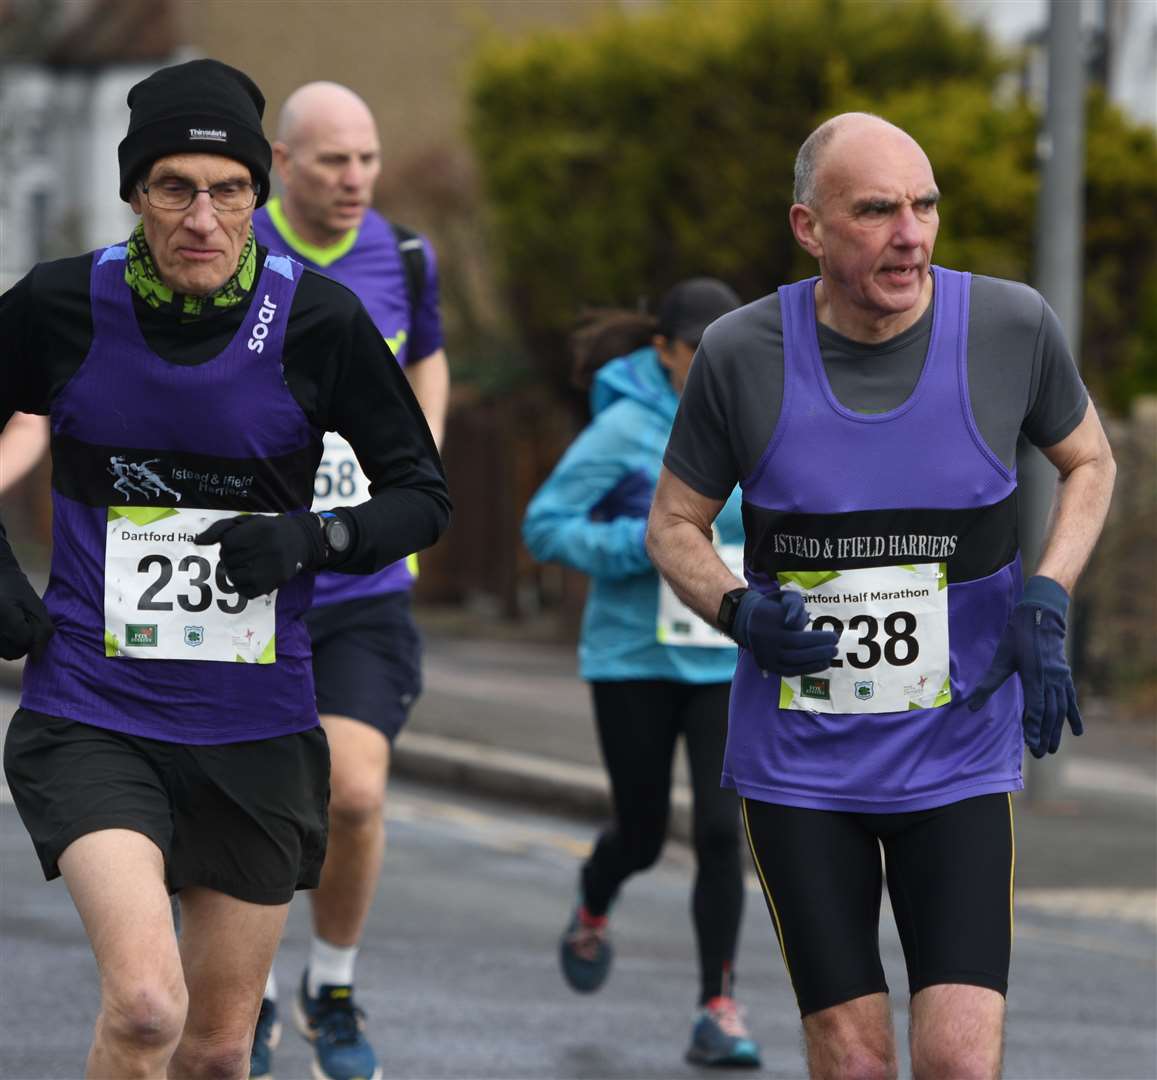 Gloves were the order of the day for some runners. Picture: Barry Goodwin (55422469)